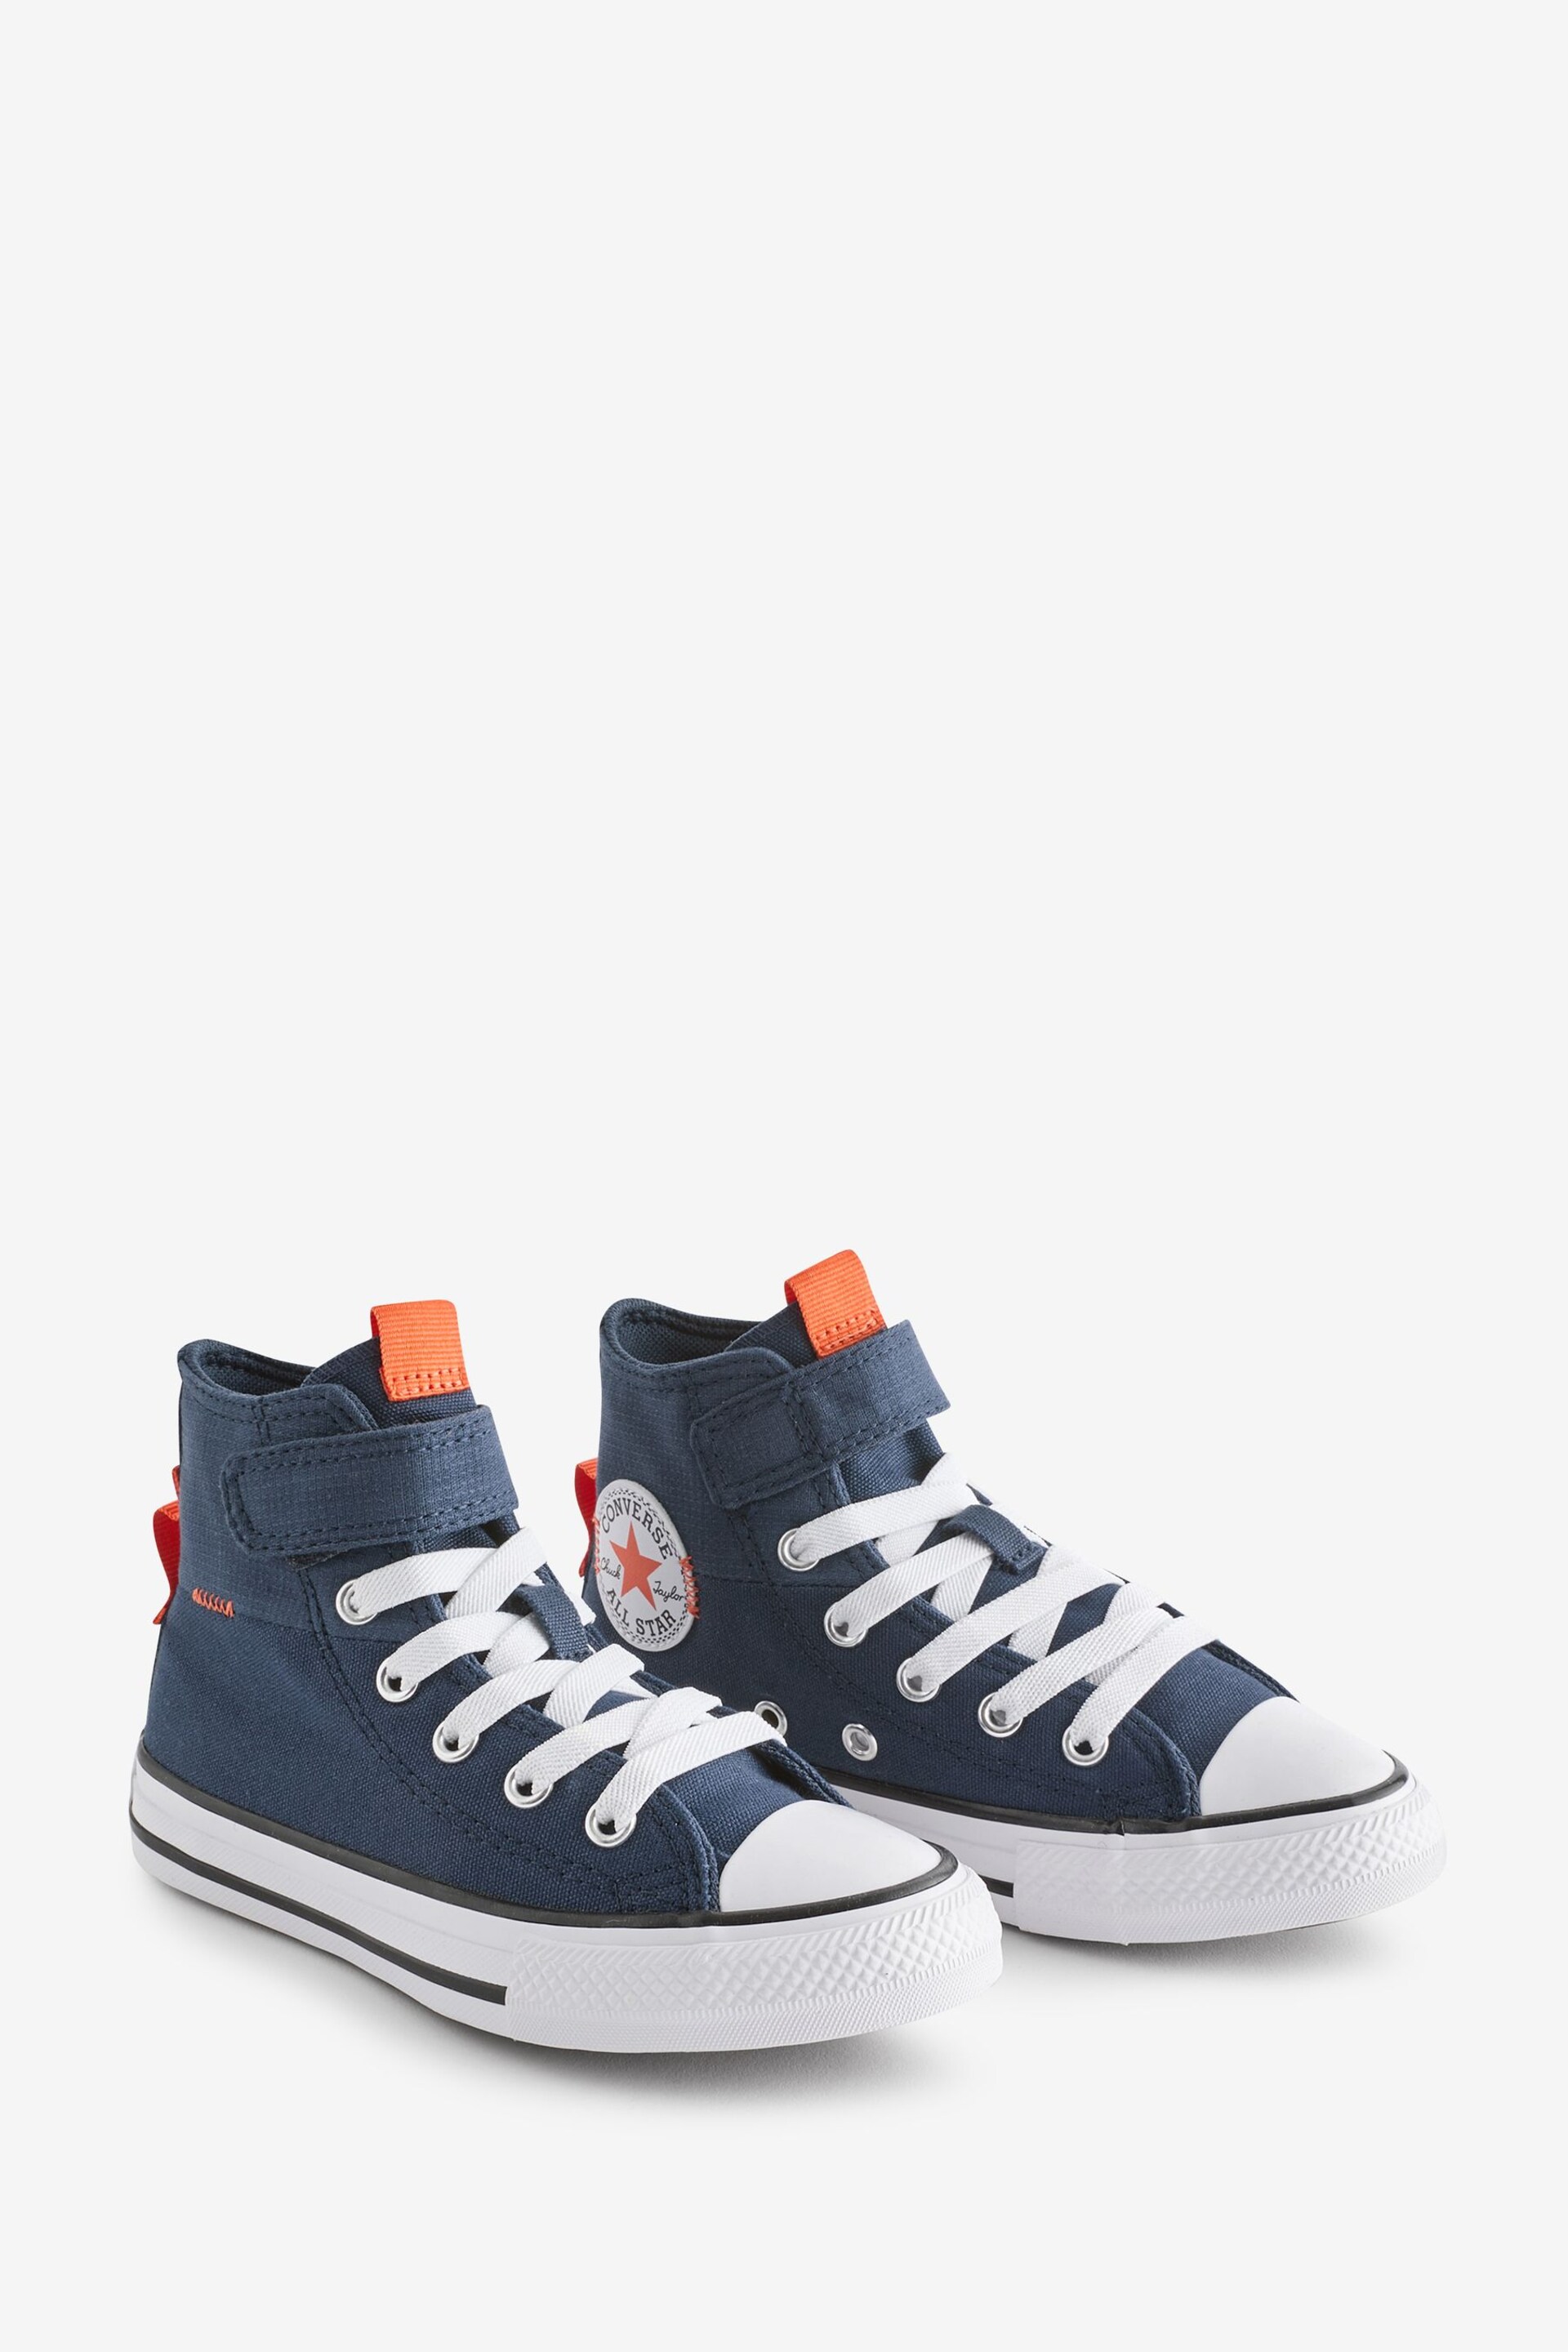 Converse Navy Junior Chuck Taylor All Star 1V Trainers - Image 3 of 9